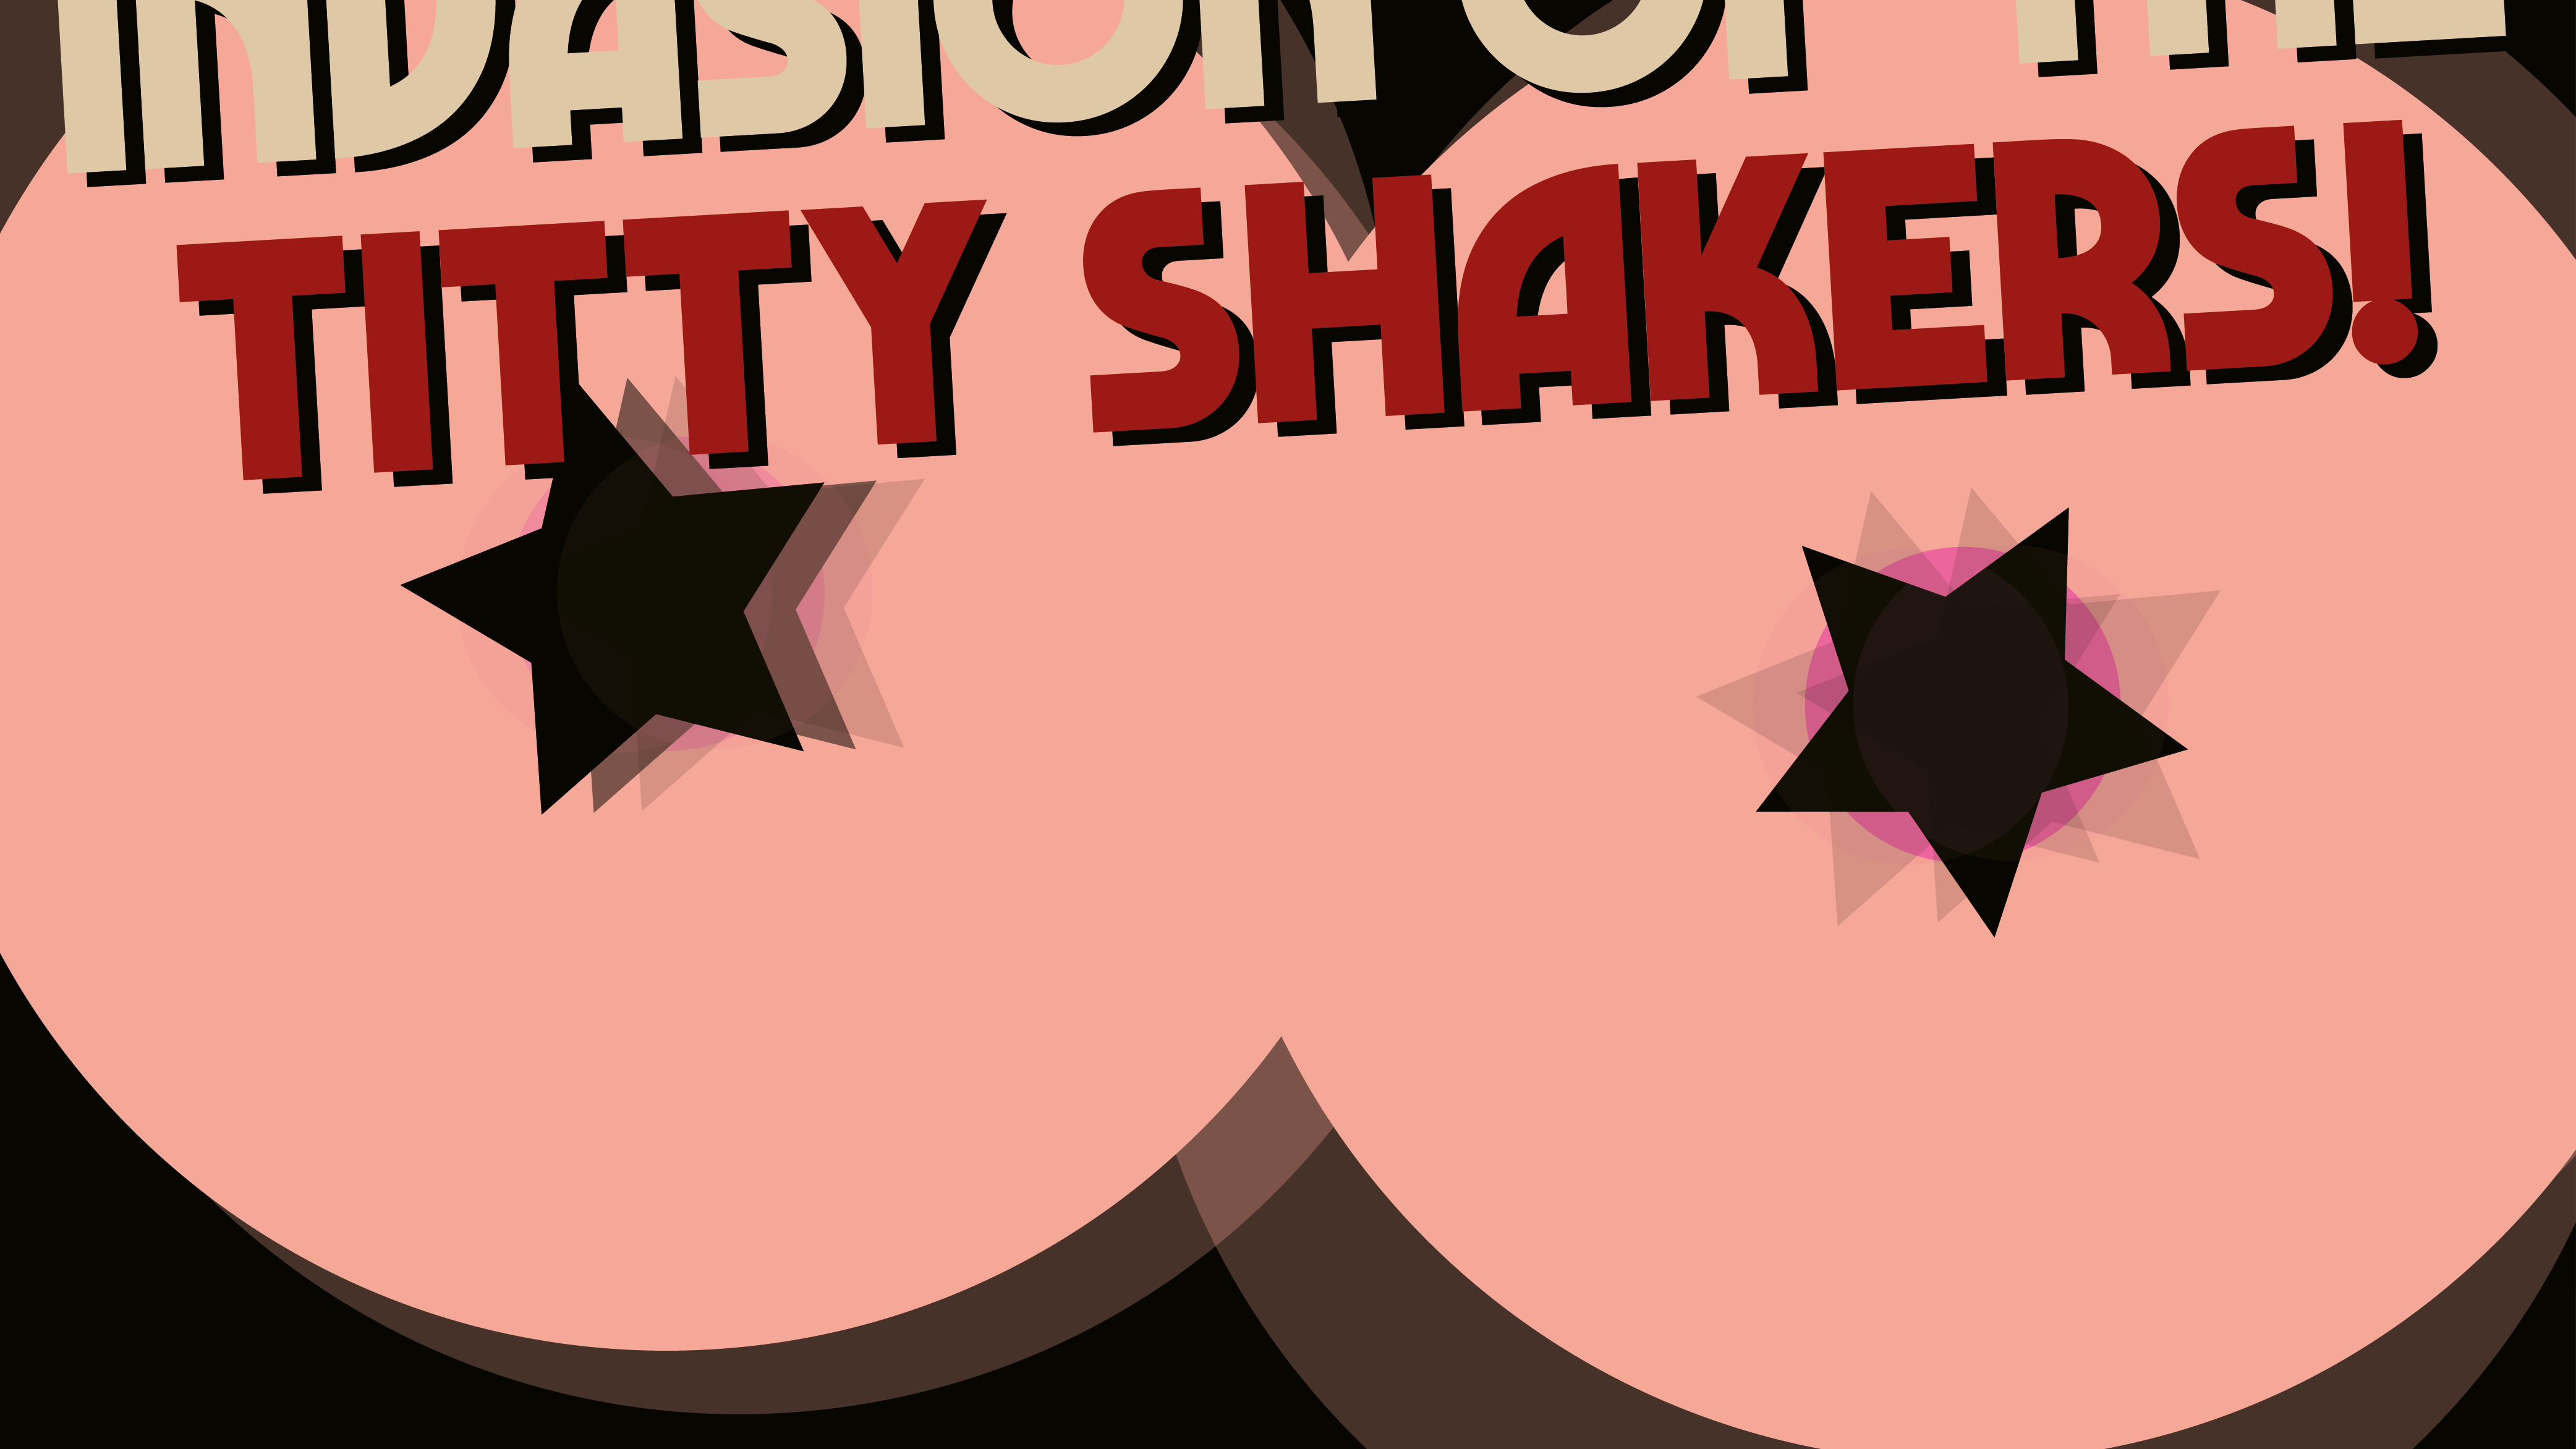 Take It Off! Burlesque & Cabaret presents: INVASION OF THE TITTY SHAKERS – Halloween Special